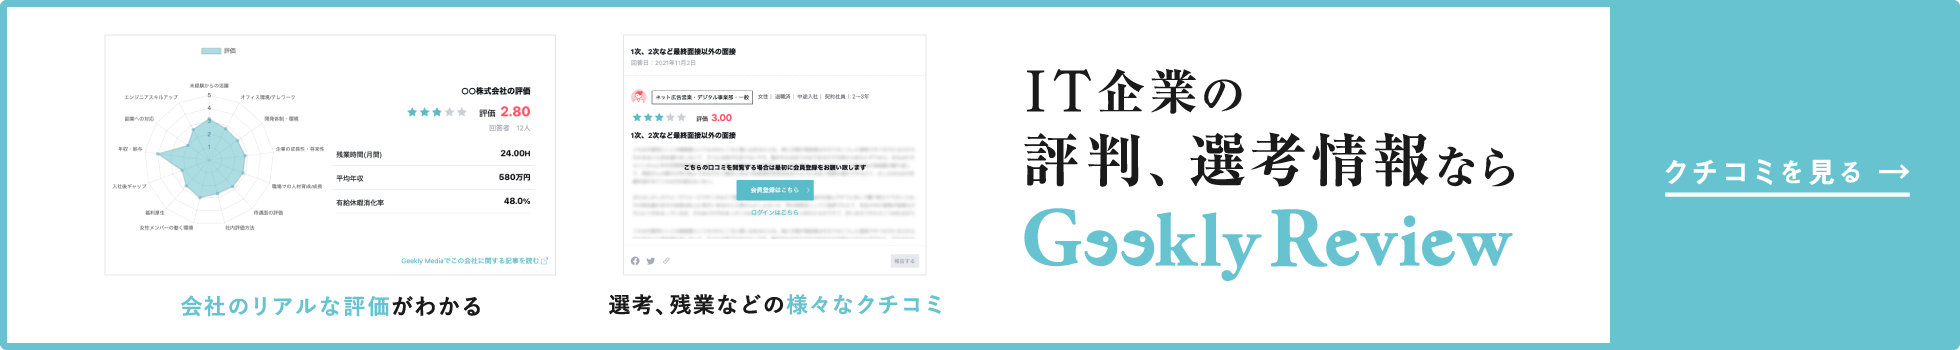 GeeklyReview バナー